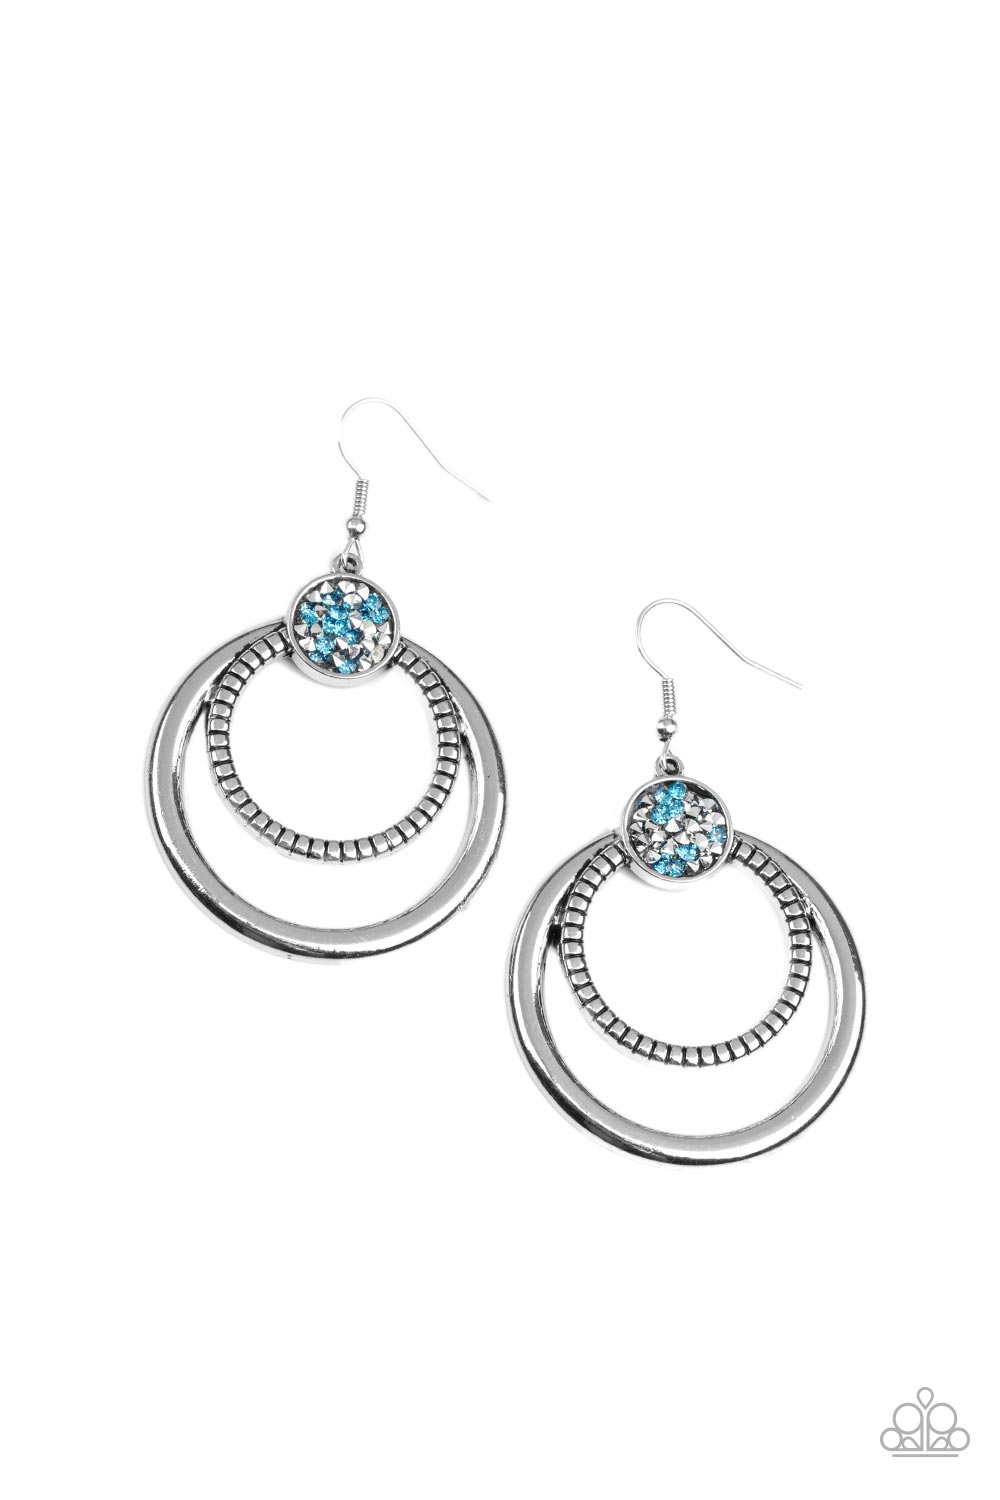 Spun Out Opulence - Paparazzi - Blue and Silver Druzy Circle Earrings 